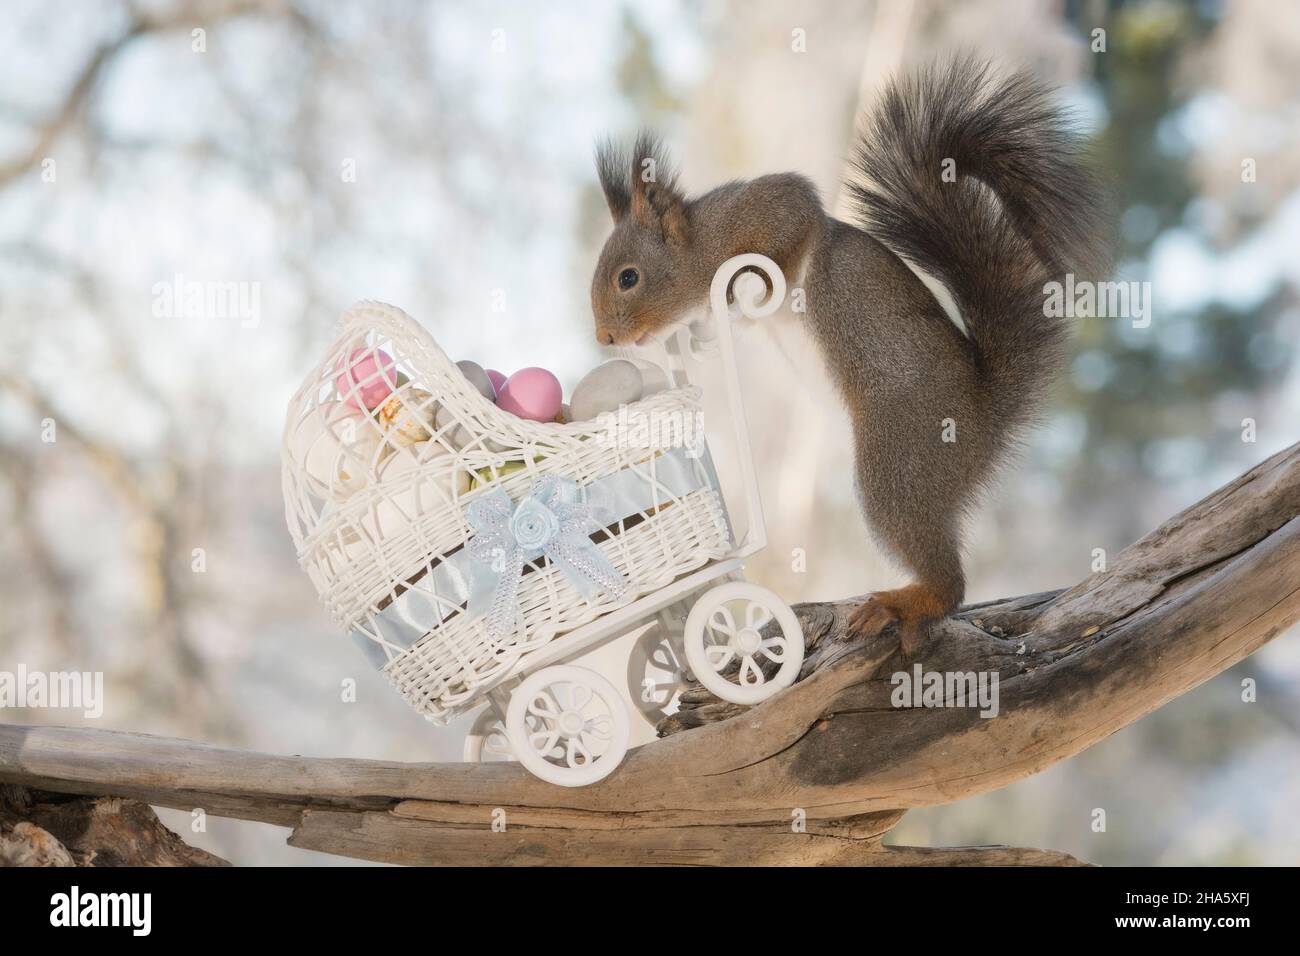 red squirrel with stroller and eggs Stock Photo